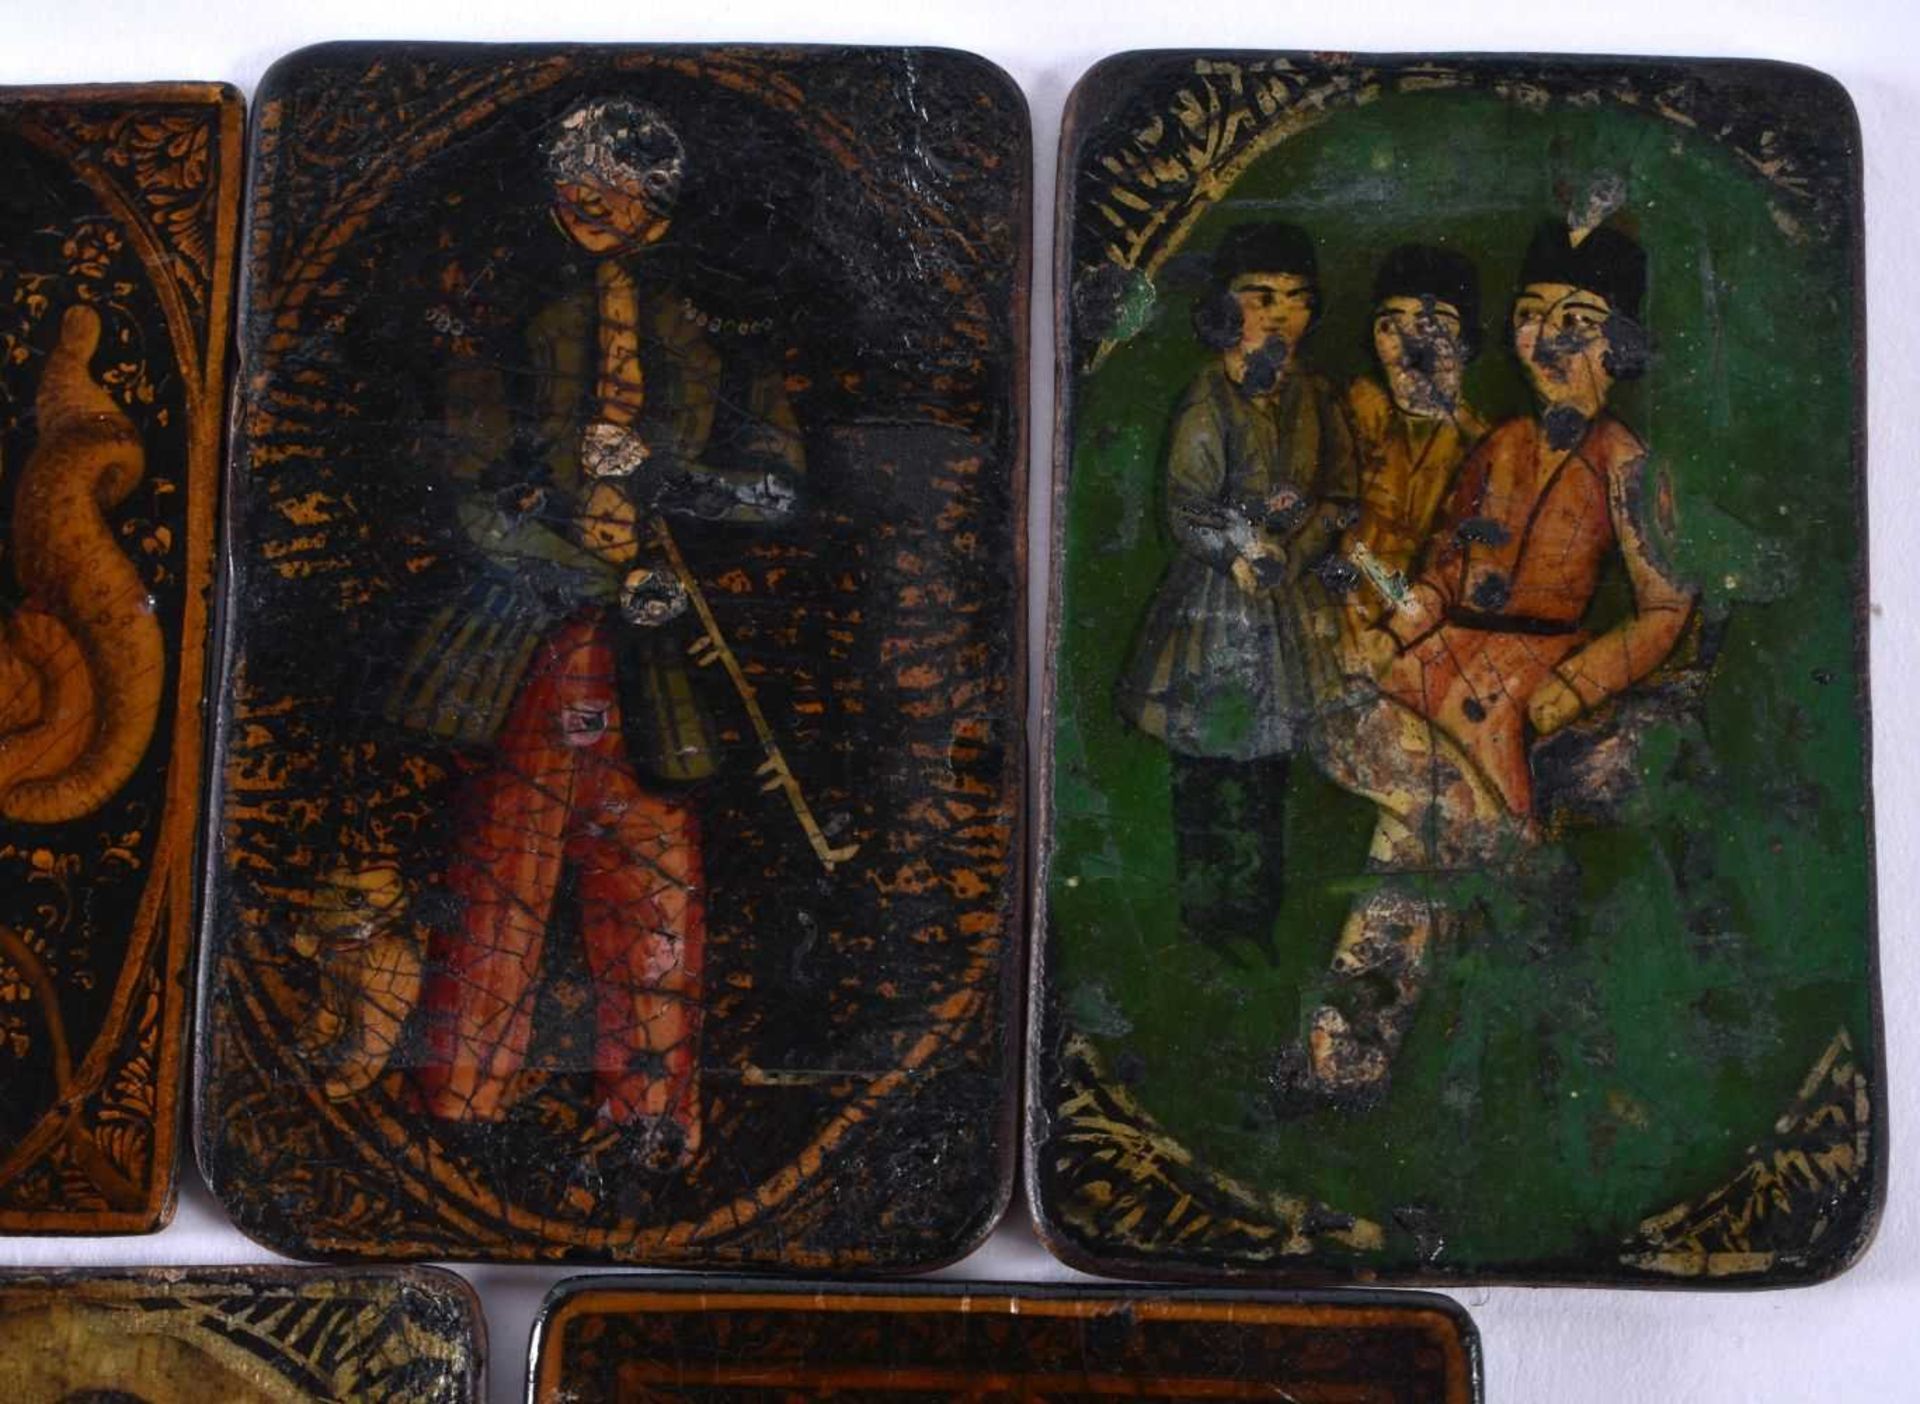 AN UNUSUAL SET OF SEVEN 19TH CENTURY PERSIAN IRANIAN QAJAR LACQUER PAINTINGS depicting figures and - Image 3 of 6